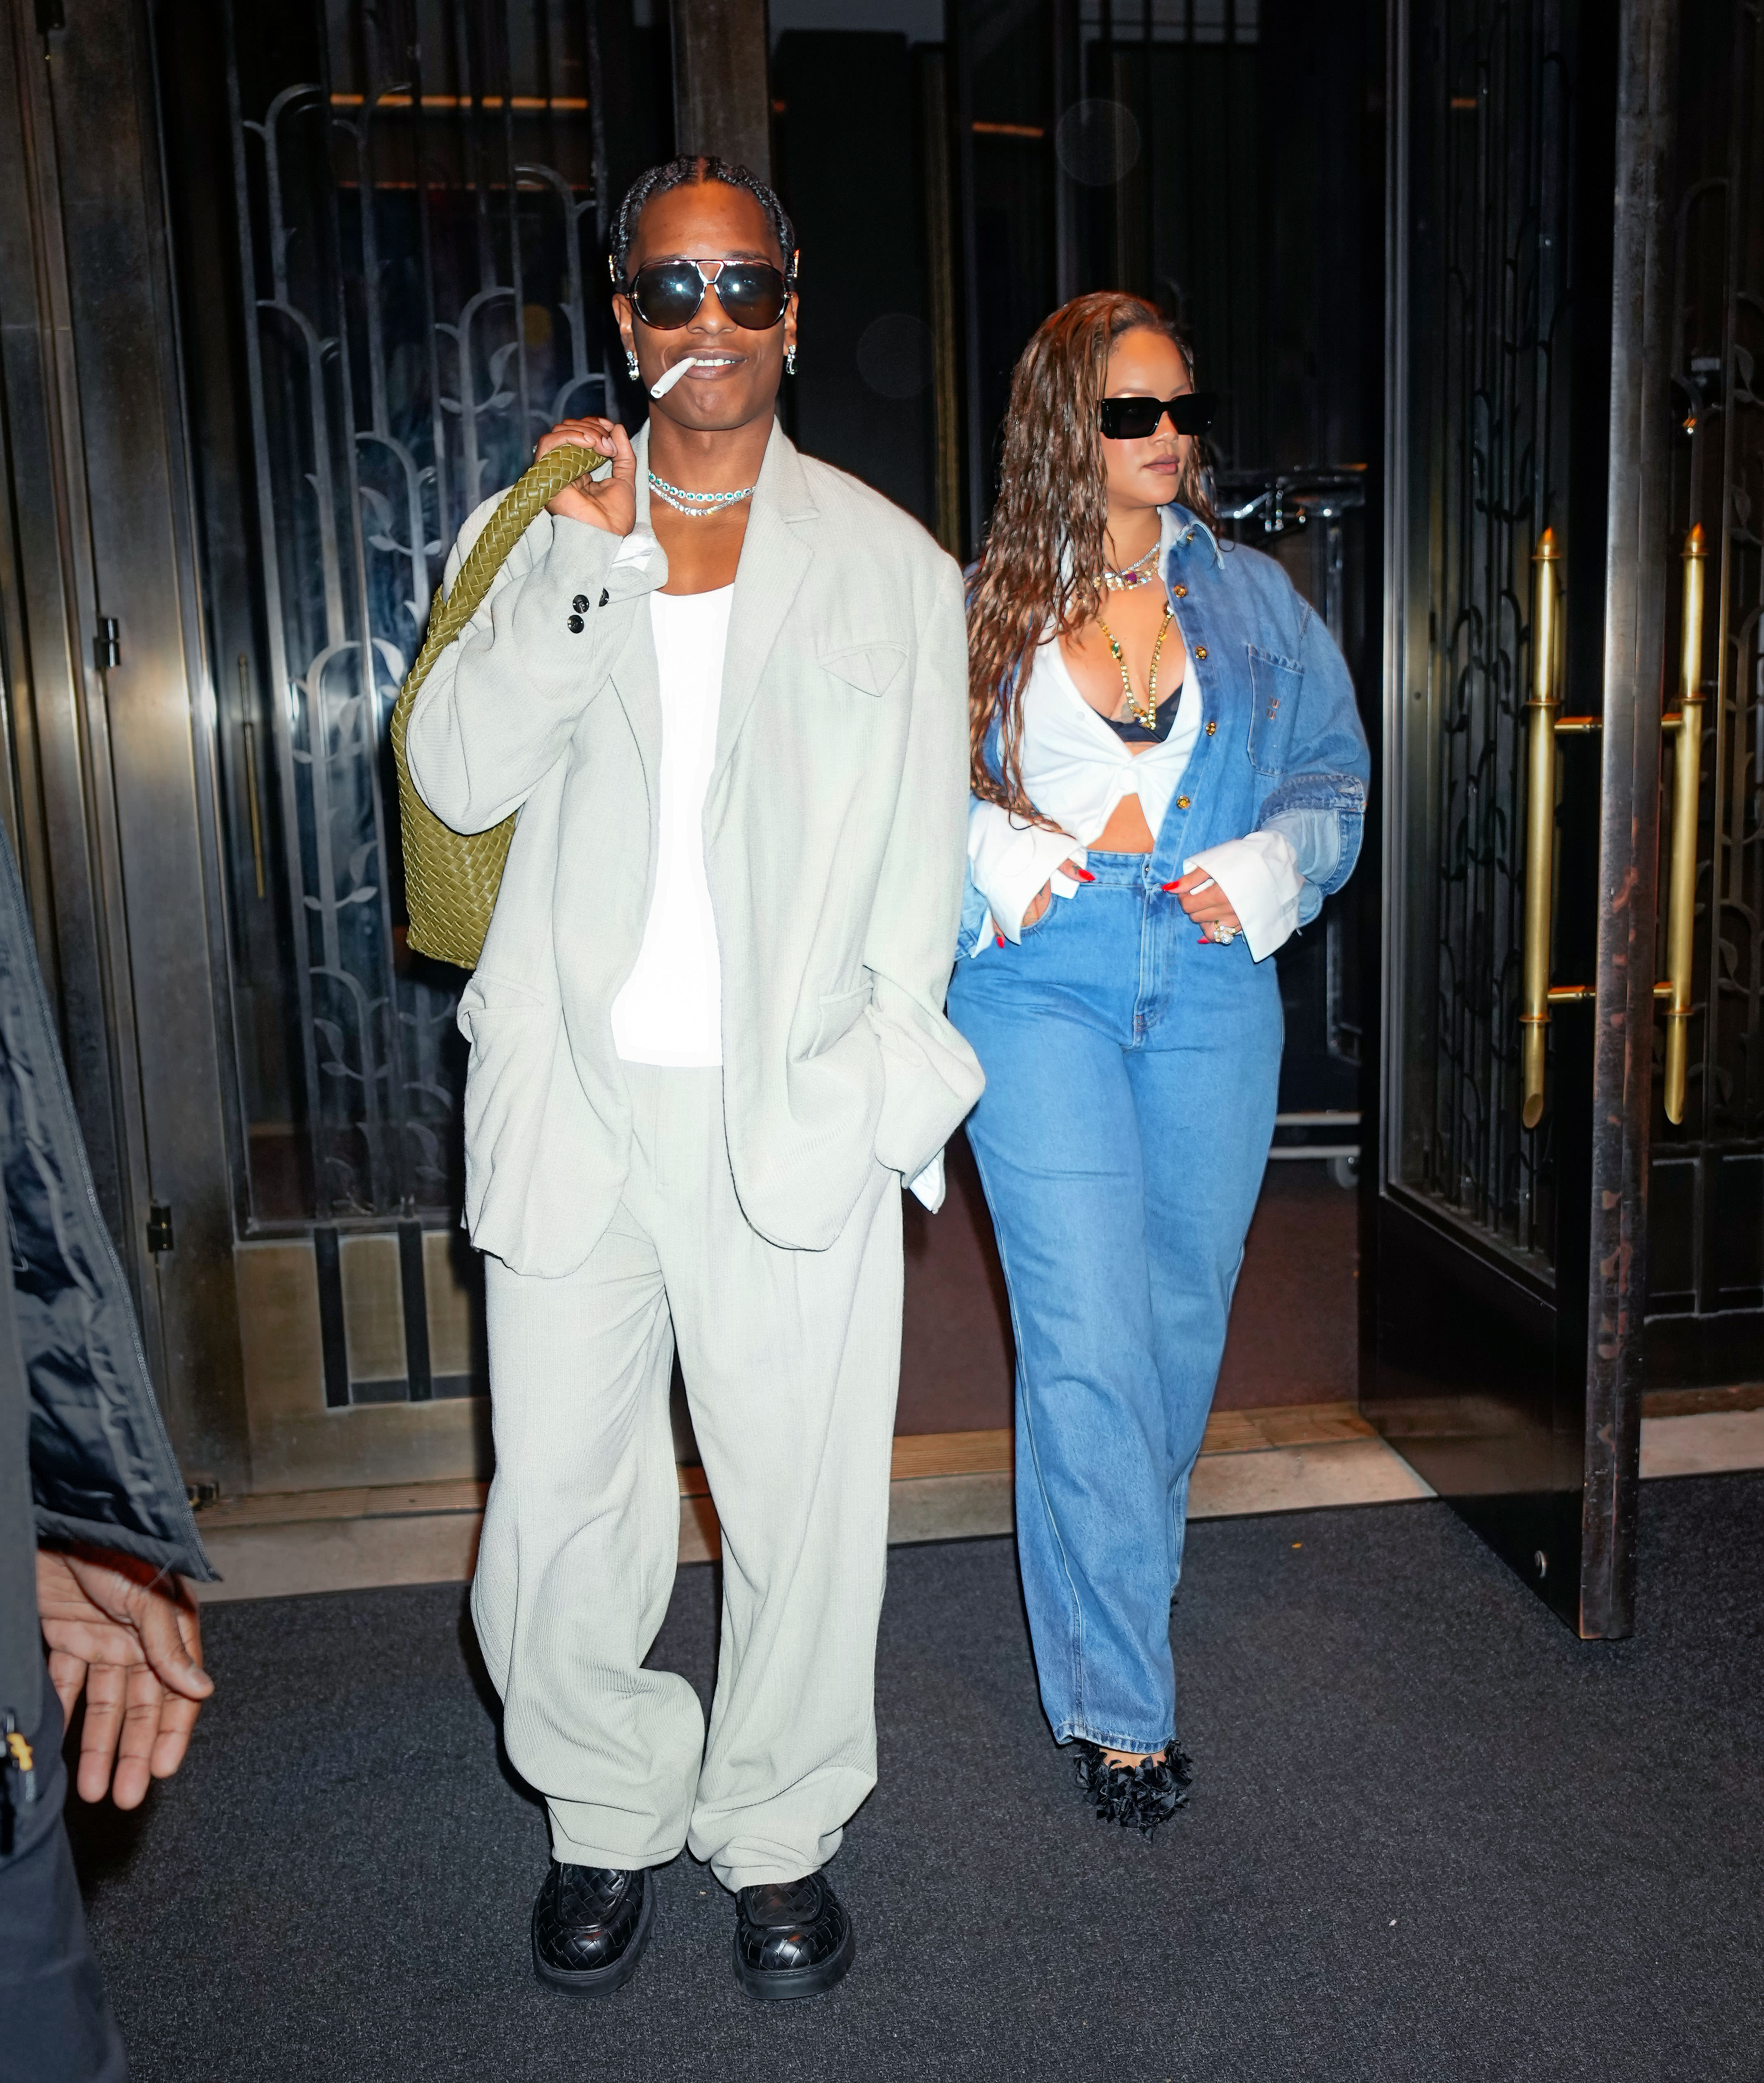 ASAP Rocky’s Gun Trial Weighing ‘Heavy’ on His and Rihanna’s Minds as They Try for Baby No. 3